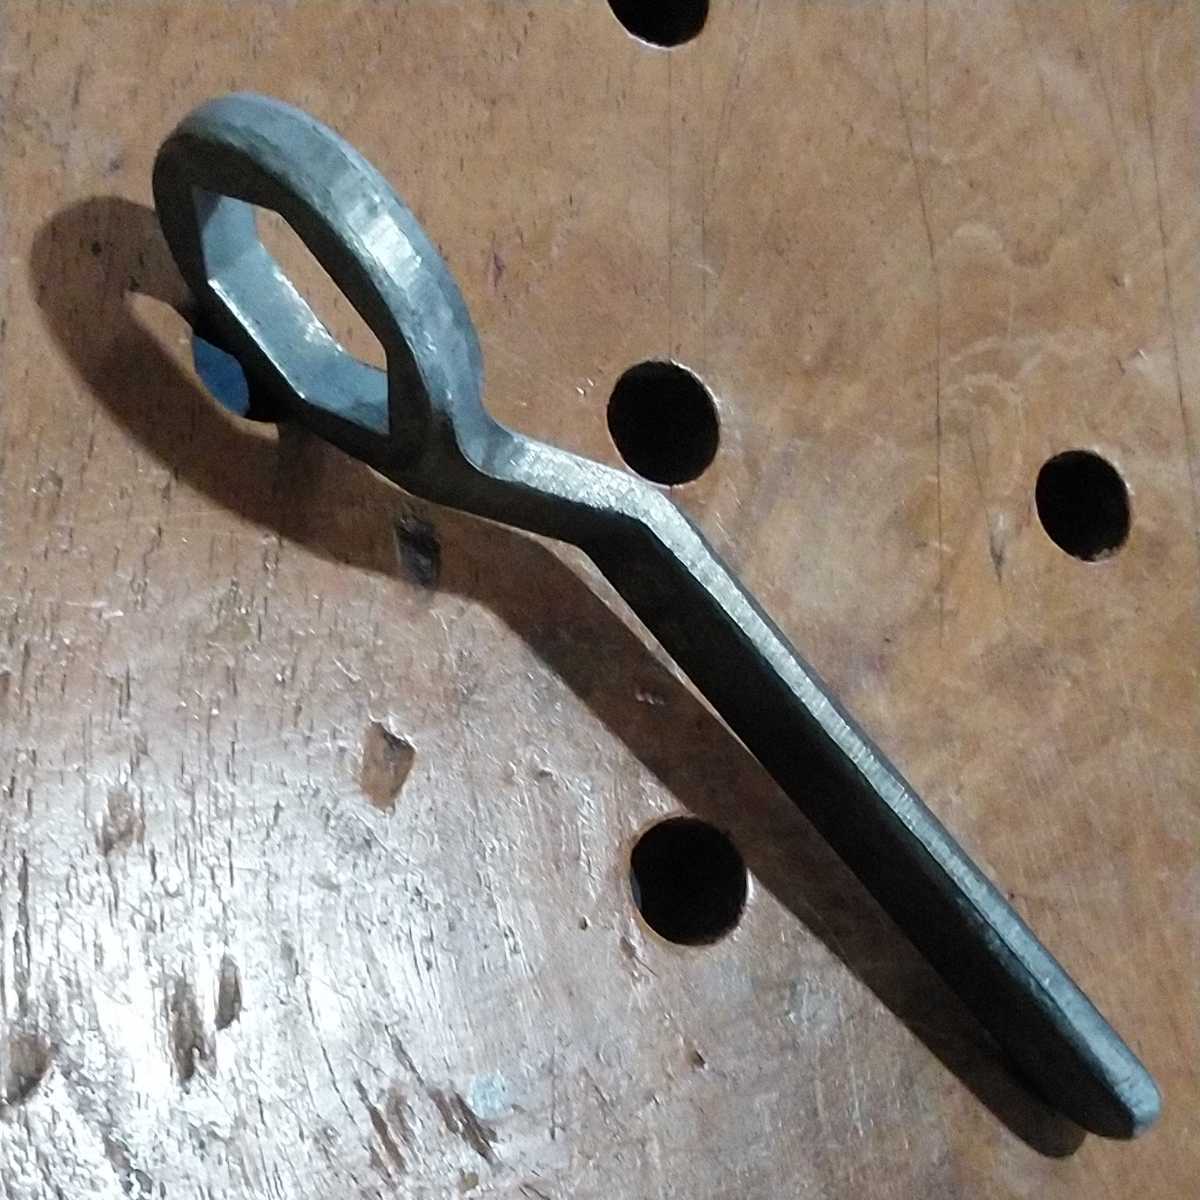  Honda loaded tool maintenance for tool glasses wrench size 23mm. old Logo HM back surface is KOWA.W1 HONDA total length 134.3mm. N360 T360 offset type 